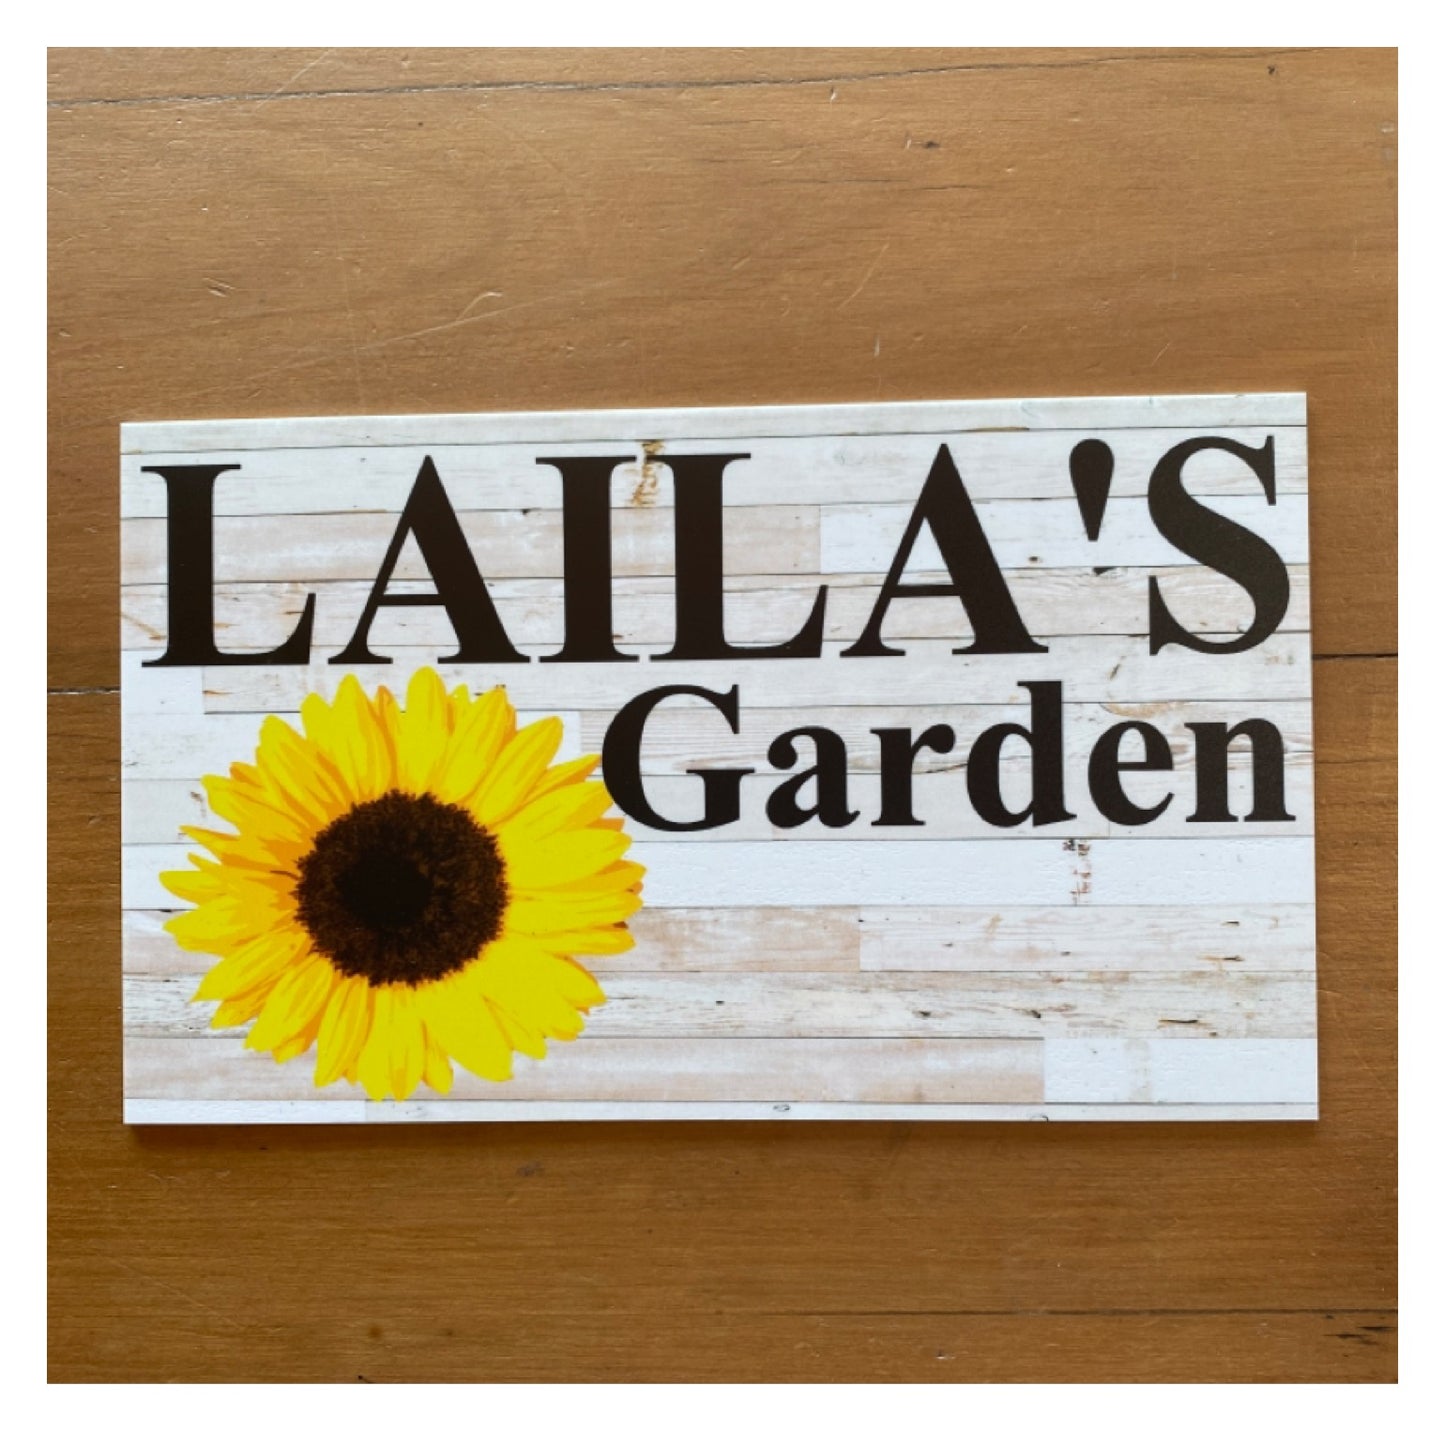 Sunflower Custom Personalised Sign - The Renmy Store Homewares & Gifts 